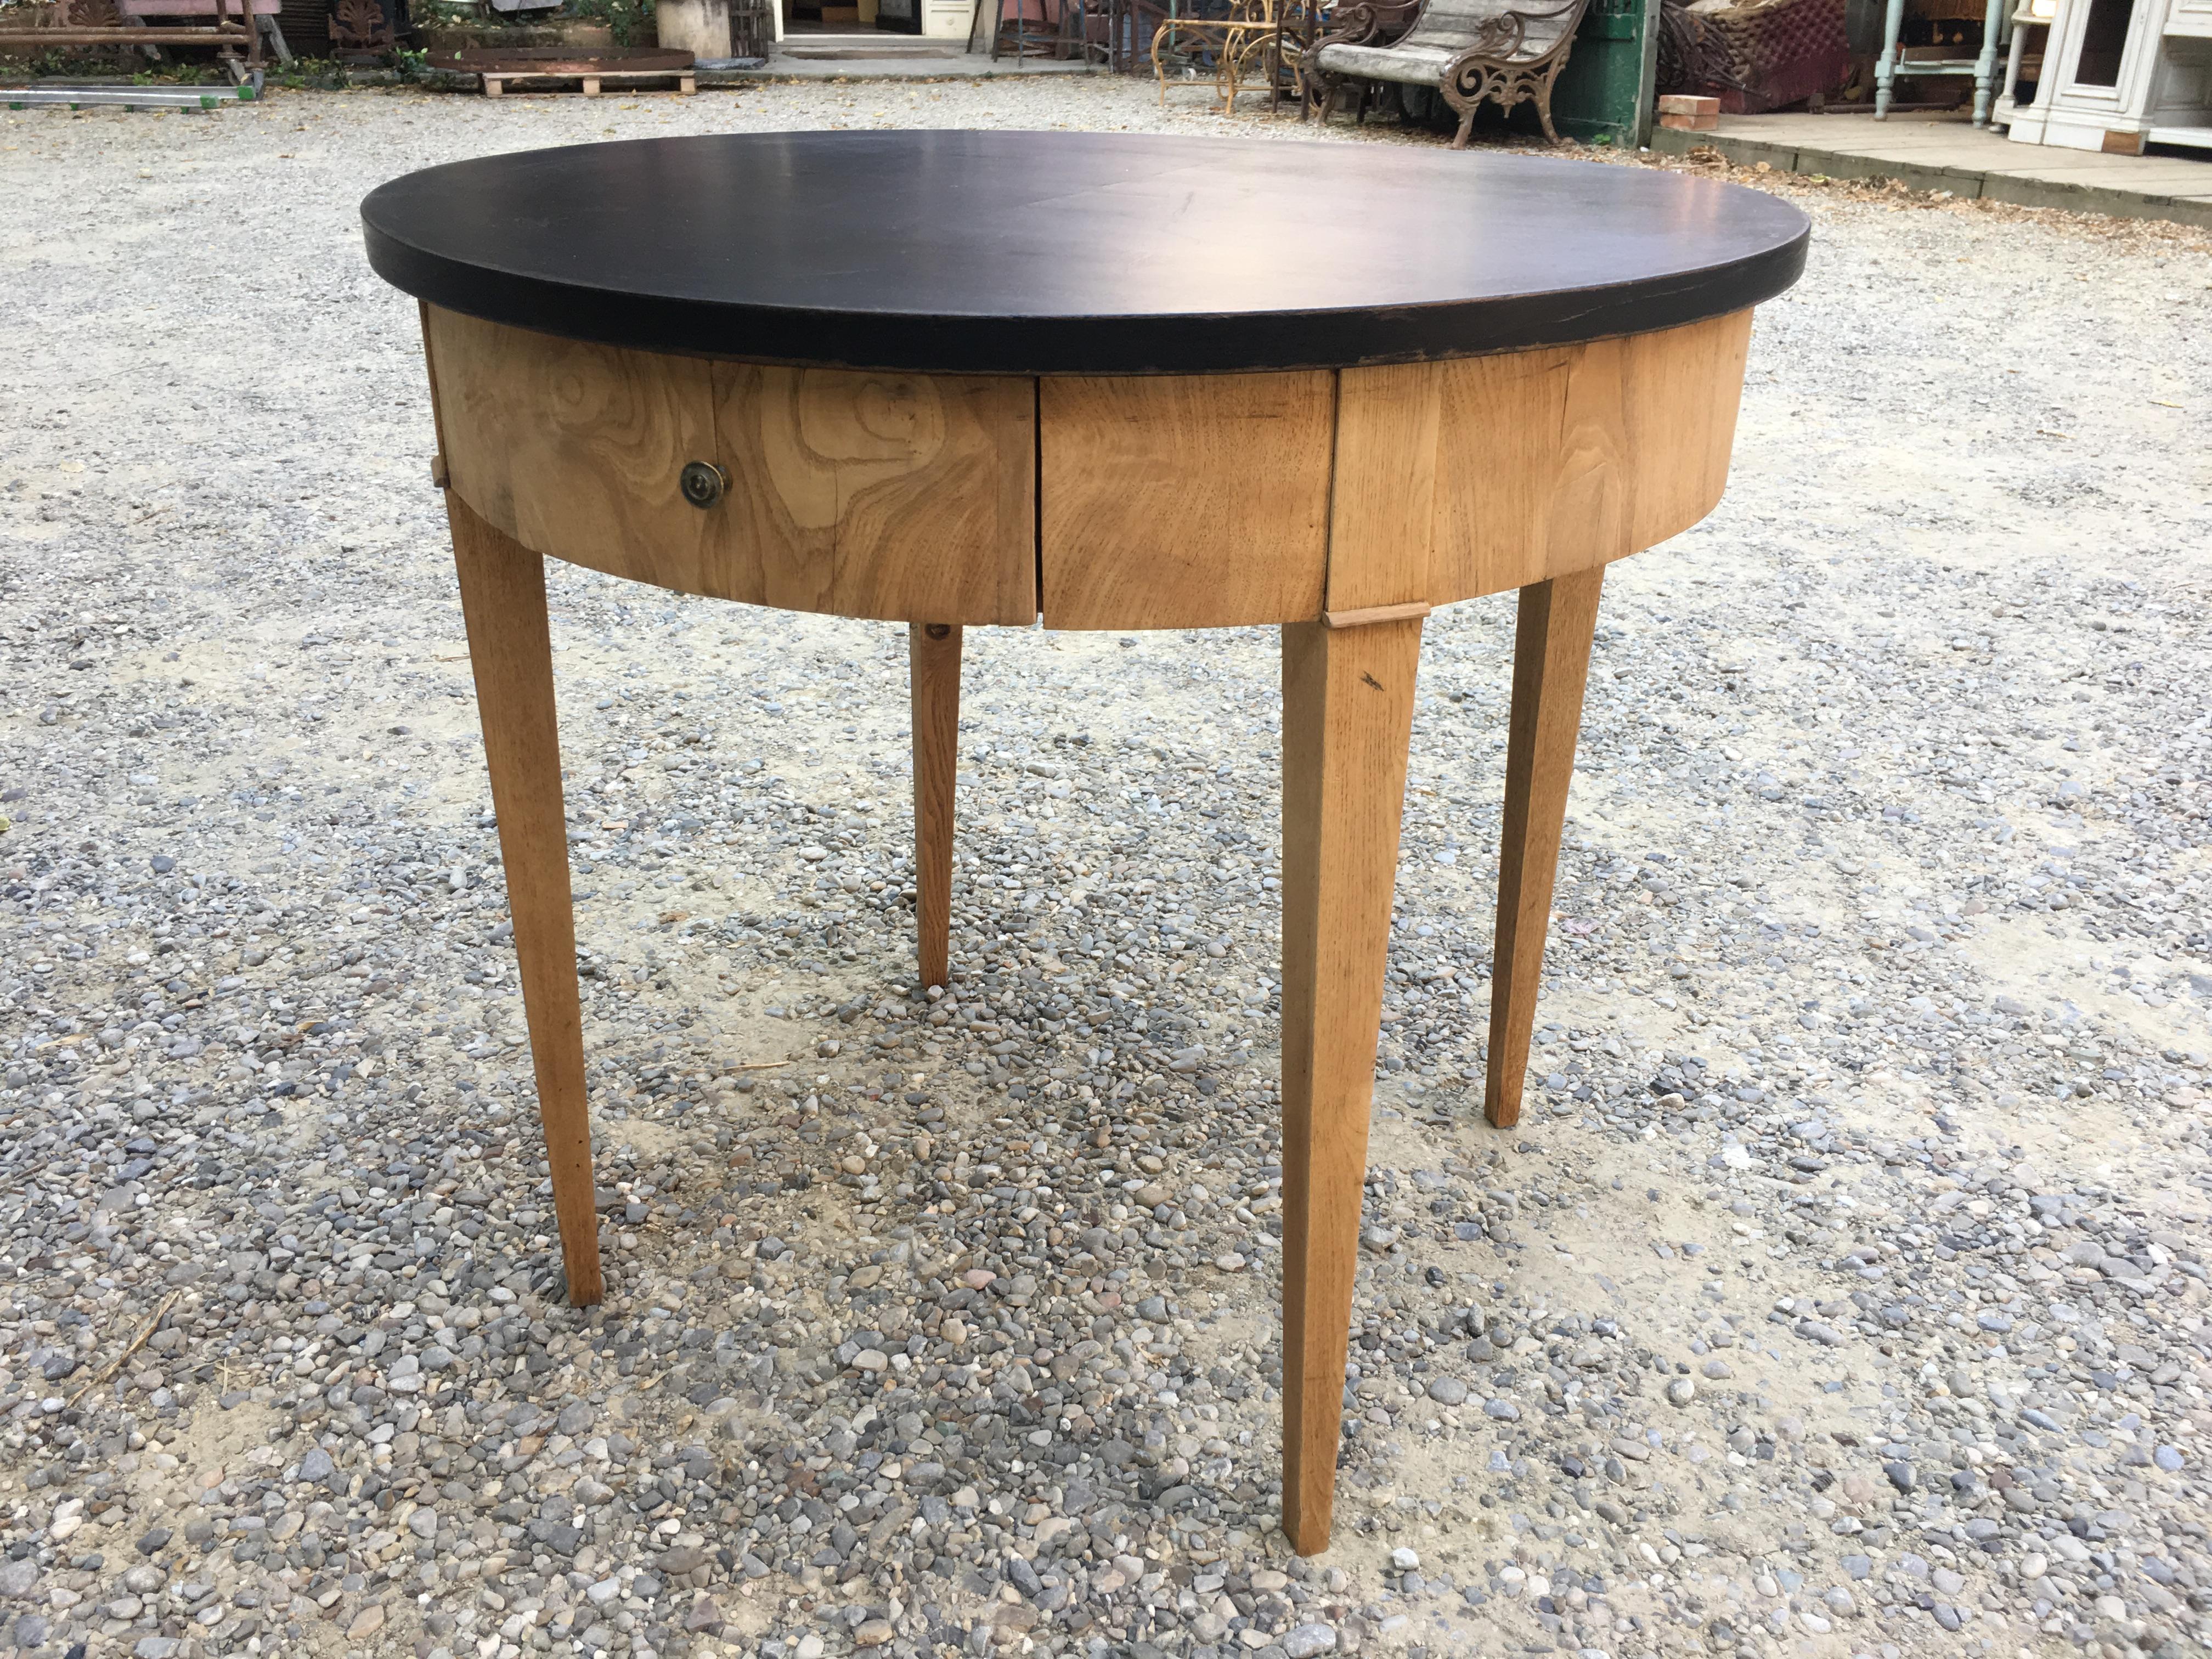 Mid-Century Modern oak table with black lacquered top from 1950s.